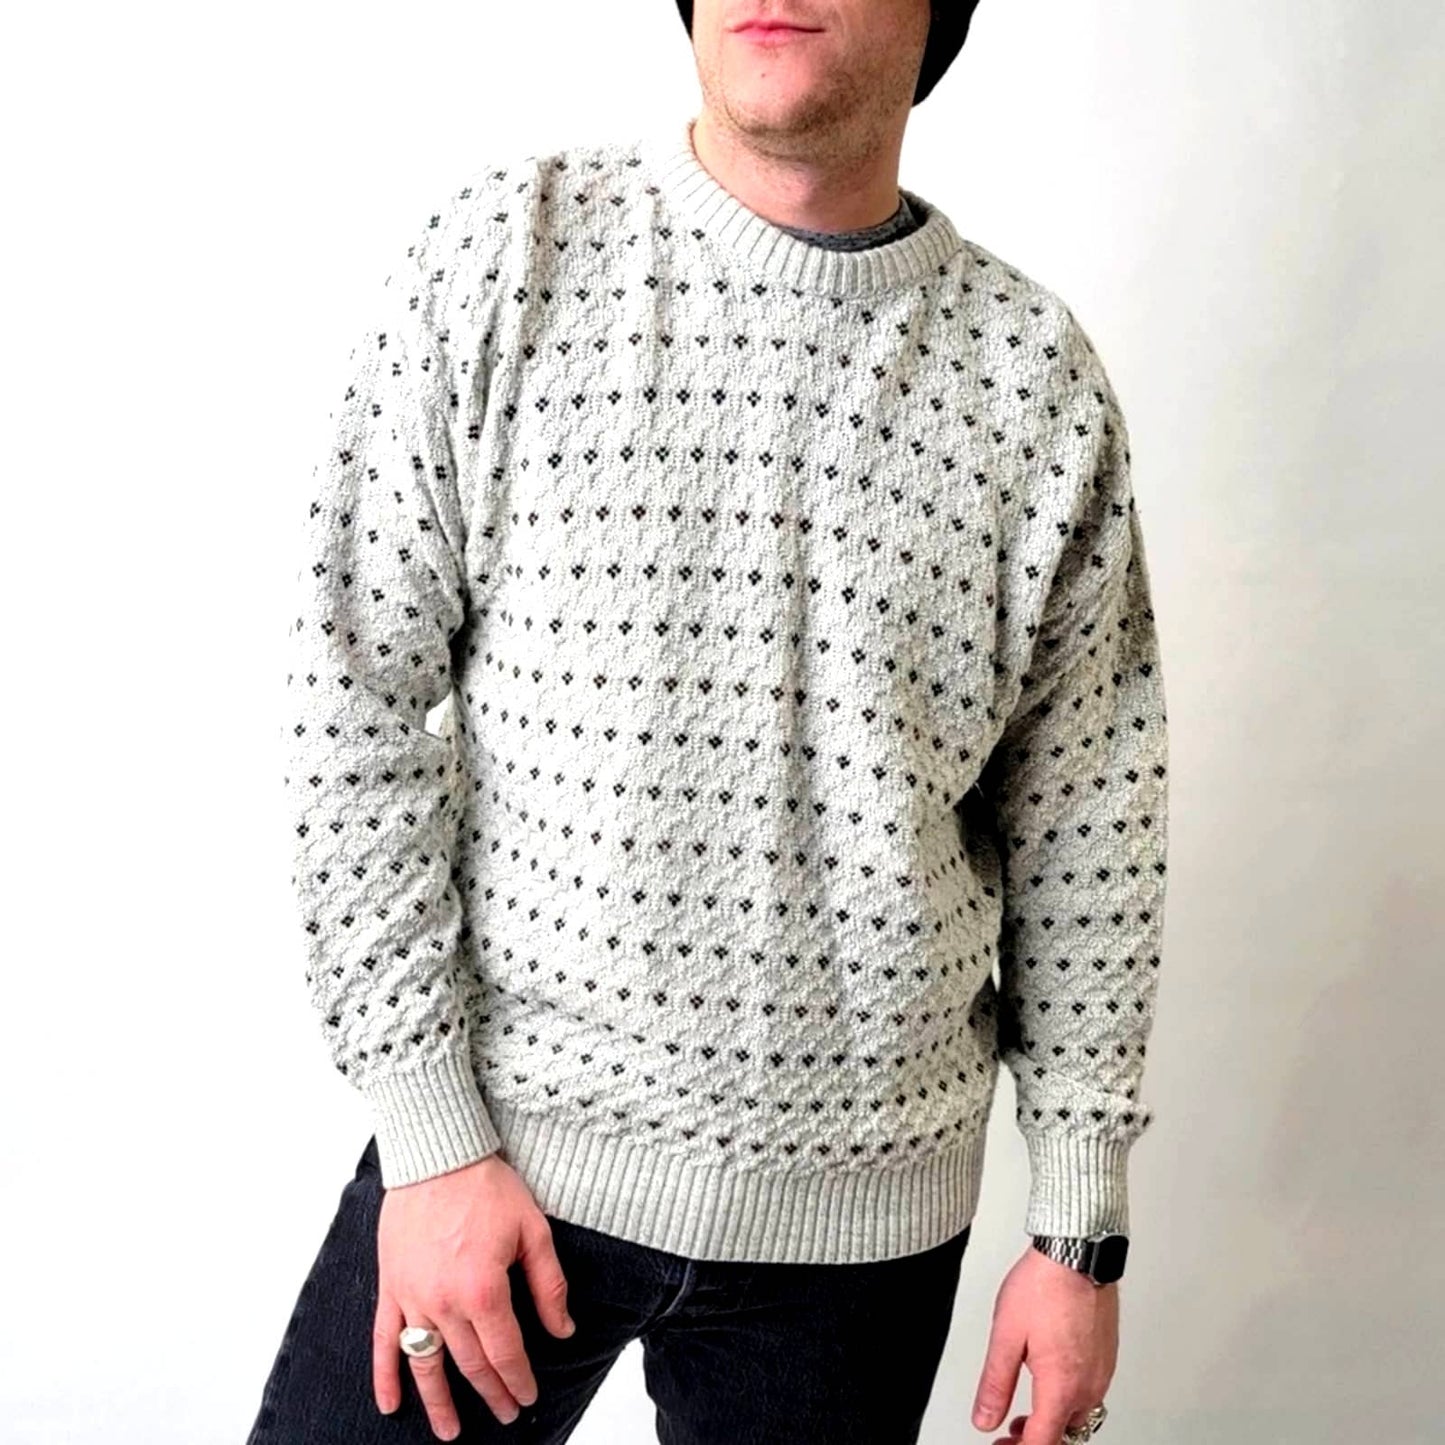 Vintage 90s Crew Neck Chunky Knit Grampa Sweater - L